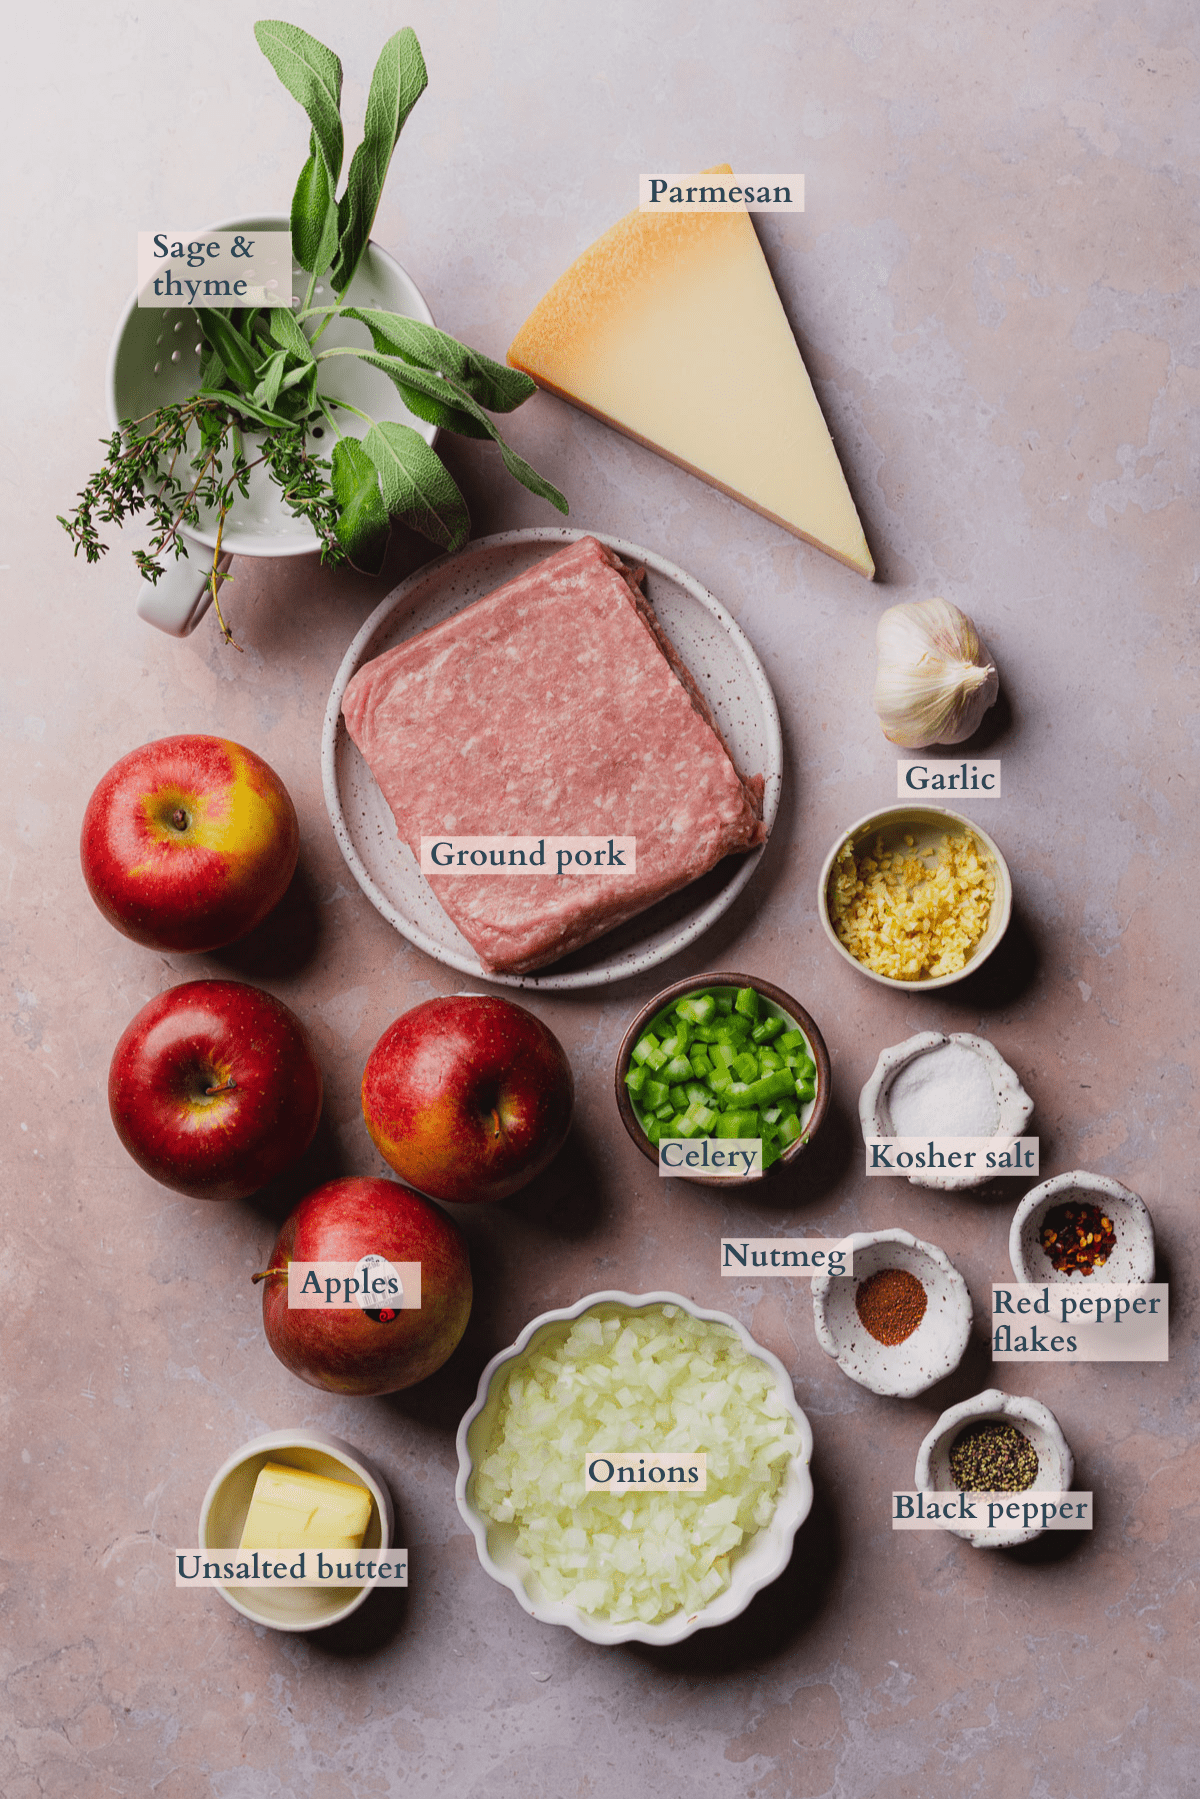 sausage stuffed apples ingredients graphic with text to denote different ingredients.